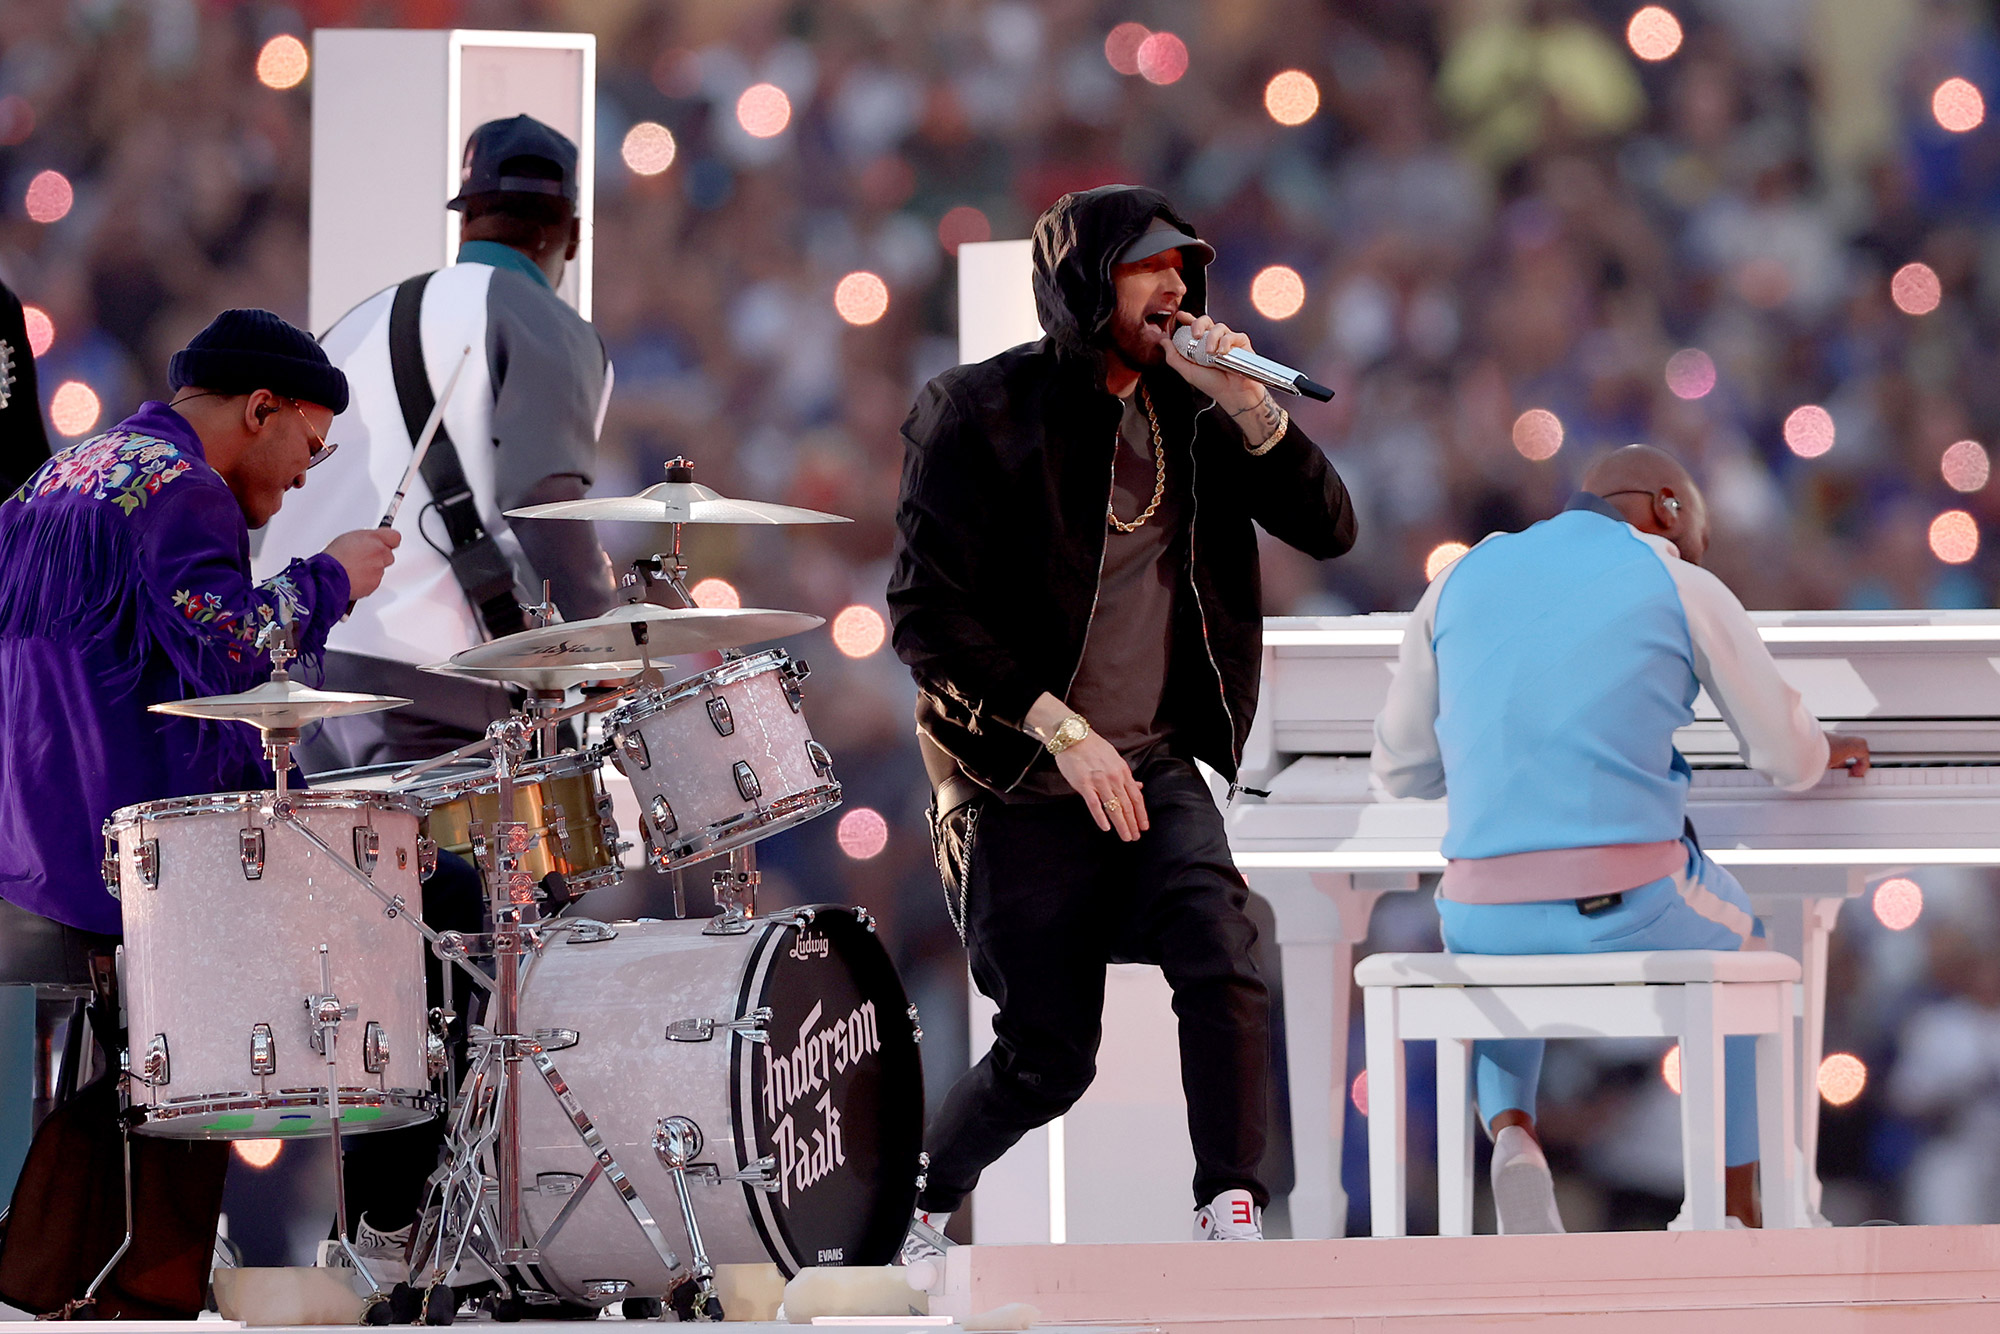 Eminem performs with Anderson Paak on drums.